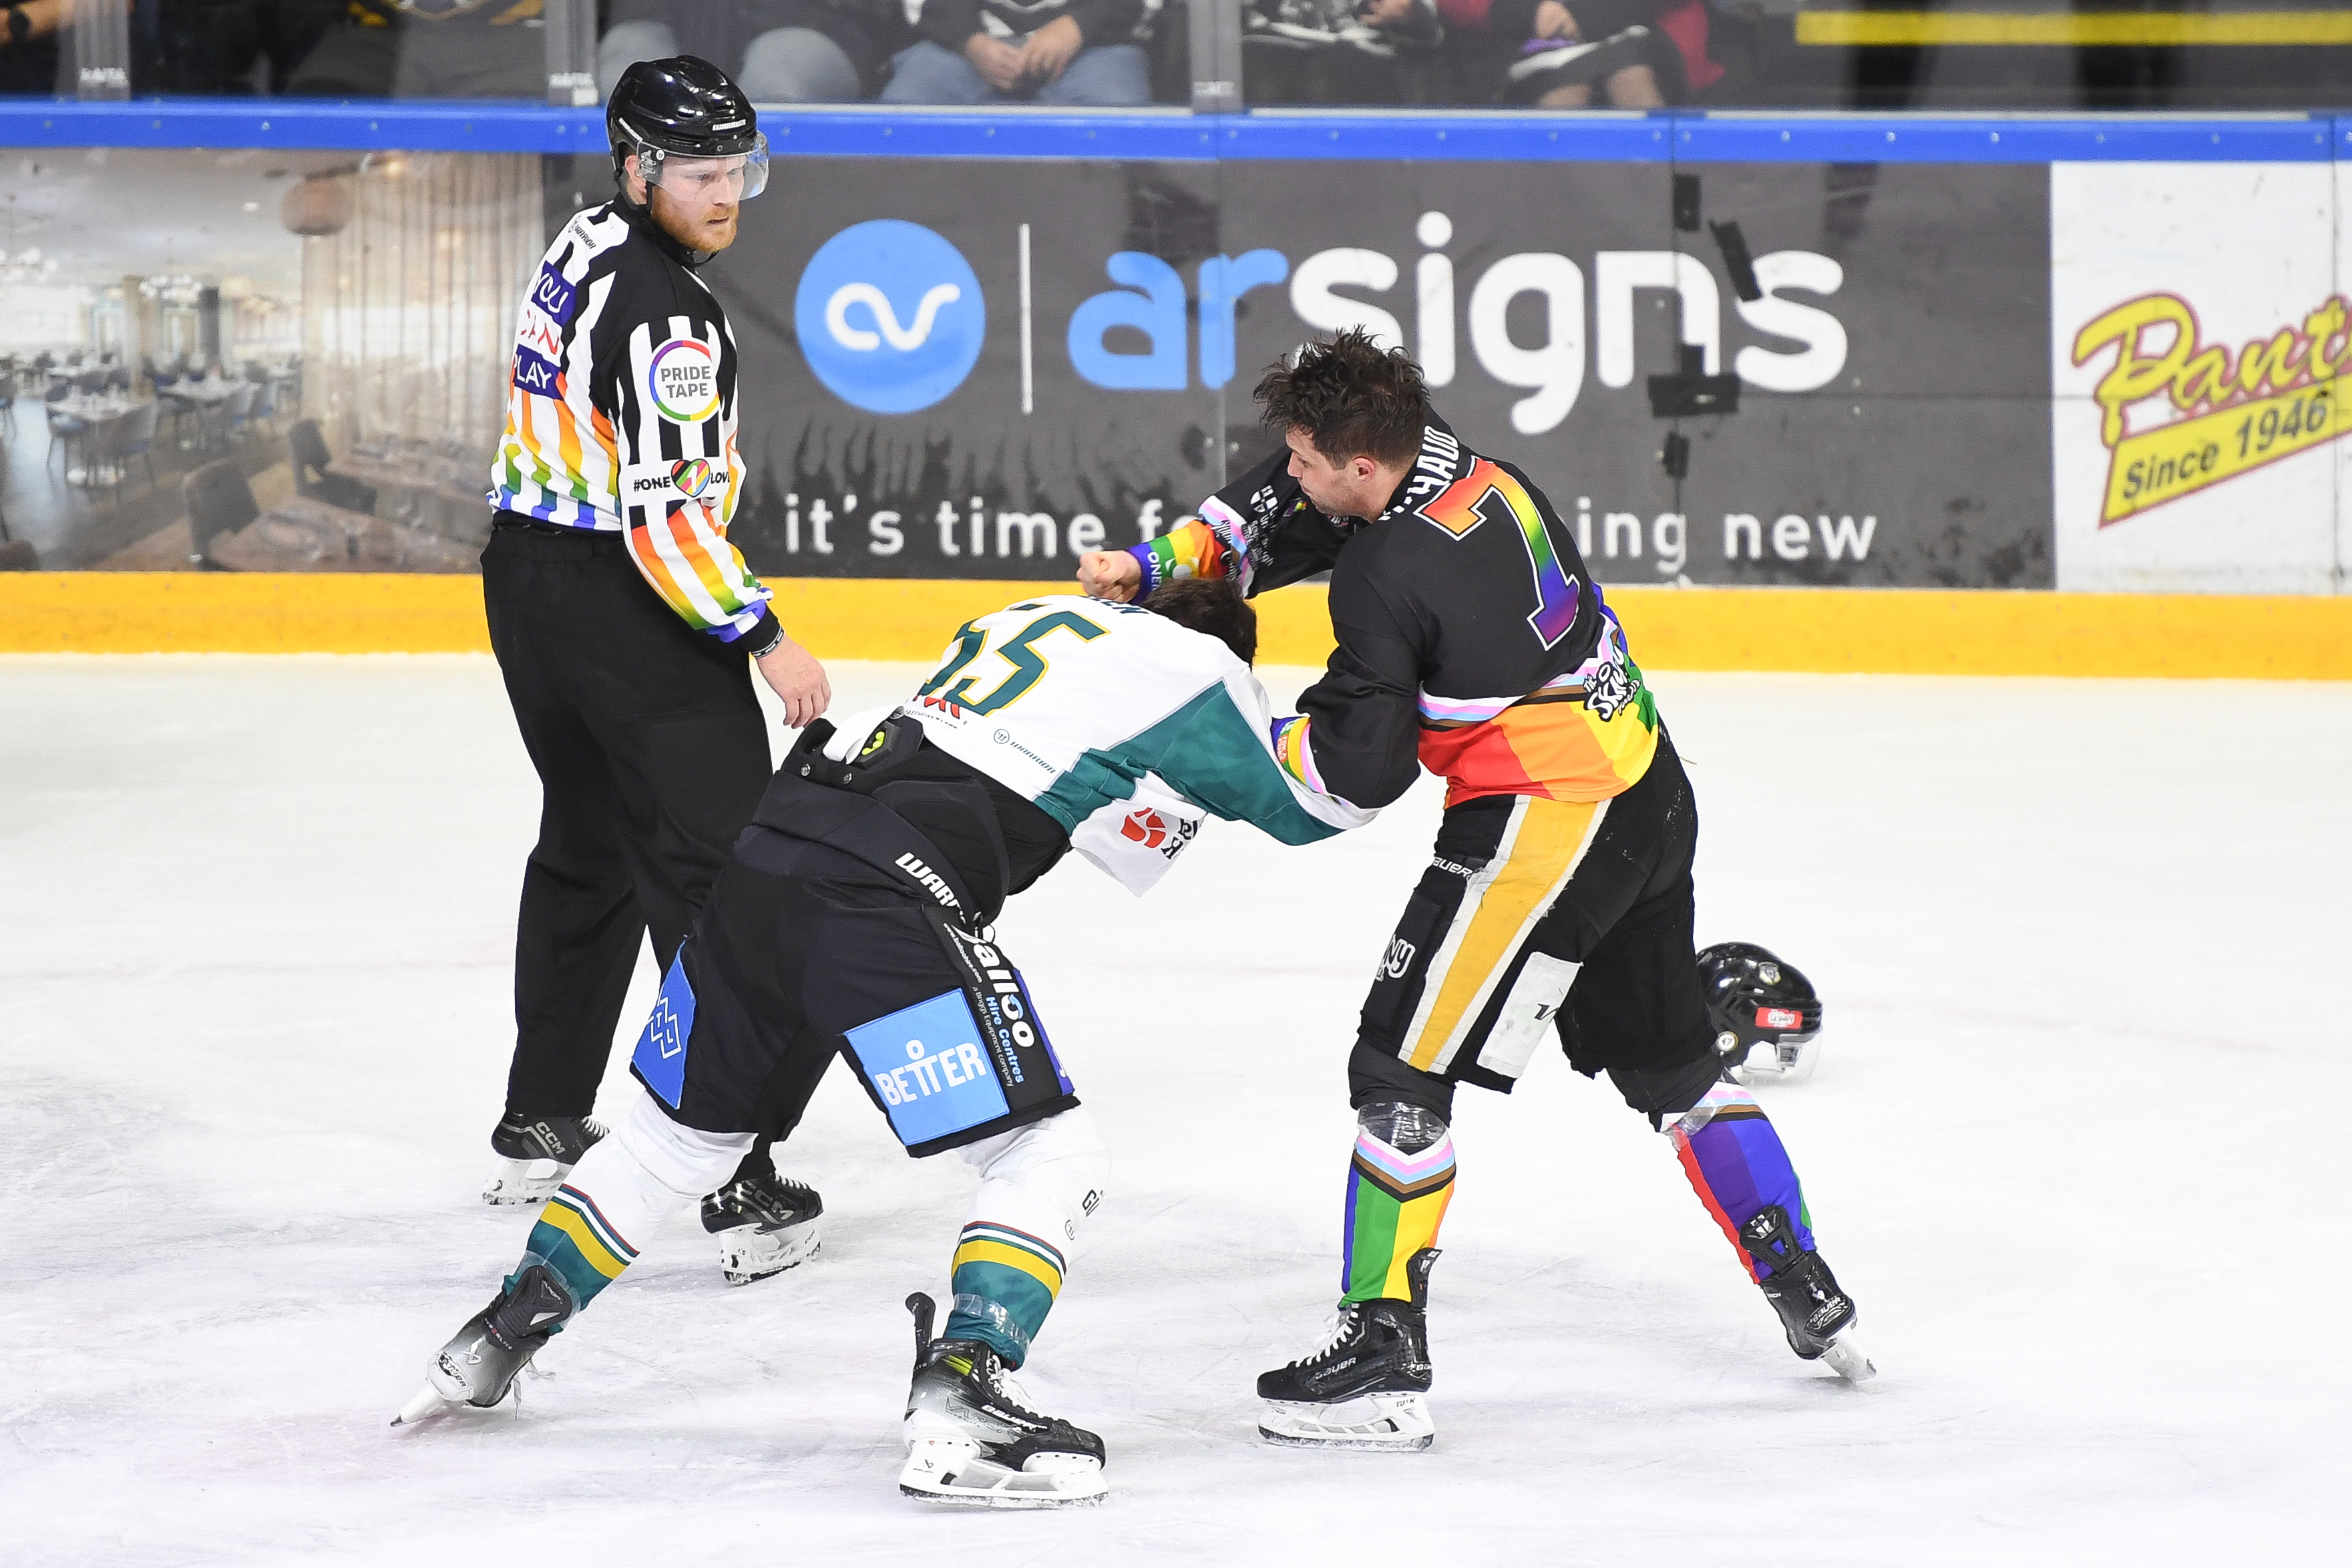 20TH JANUARY 2024: PANTHERS 2-7 GIANTS Top Image